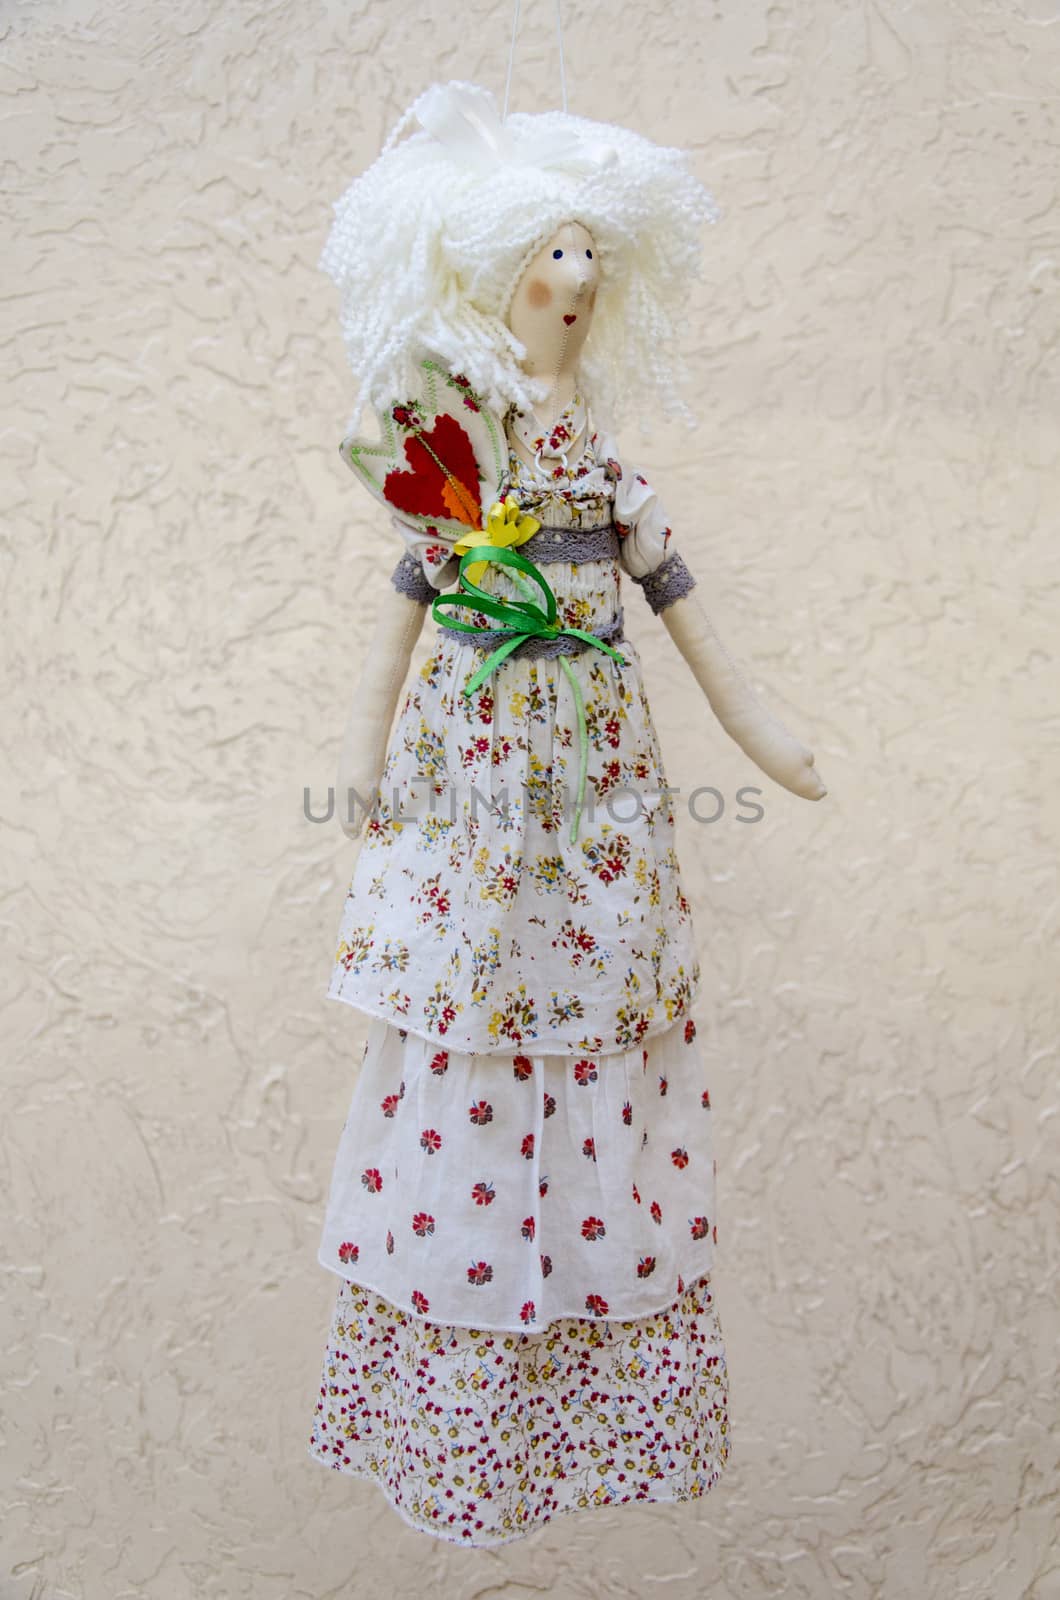 The Handmade doll with a flower in his belt in a long white dress on a string